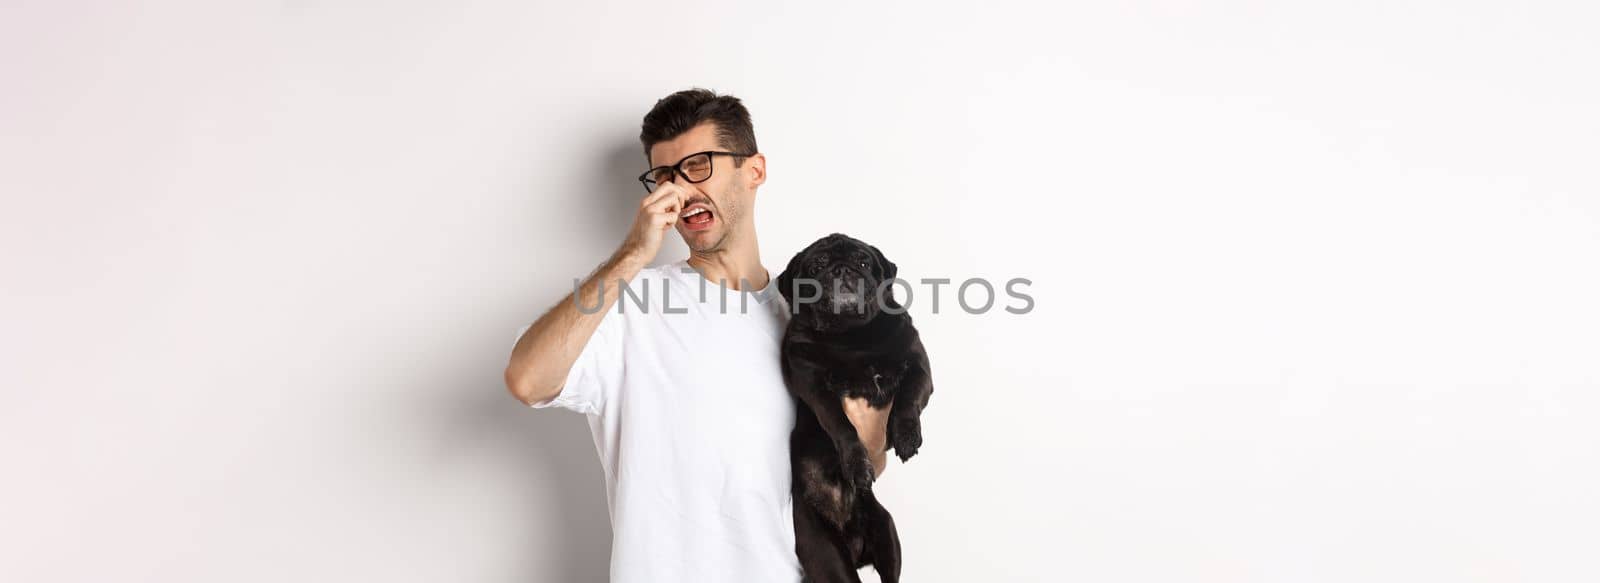 Dog owner squinting and shutting nose from disgusting reek, holding pug with bed smell, standing over white background.